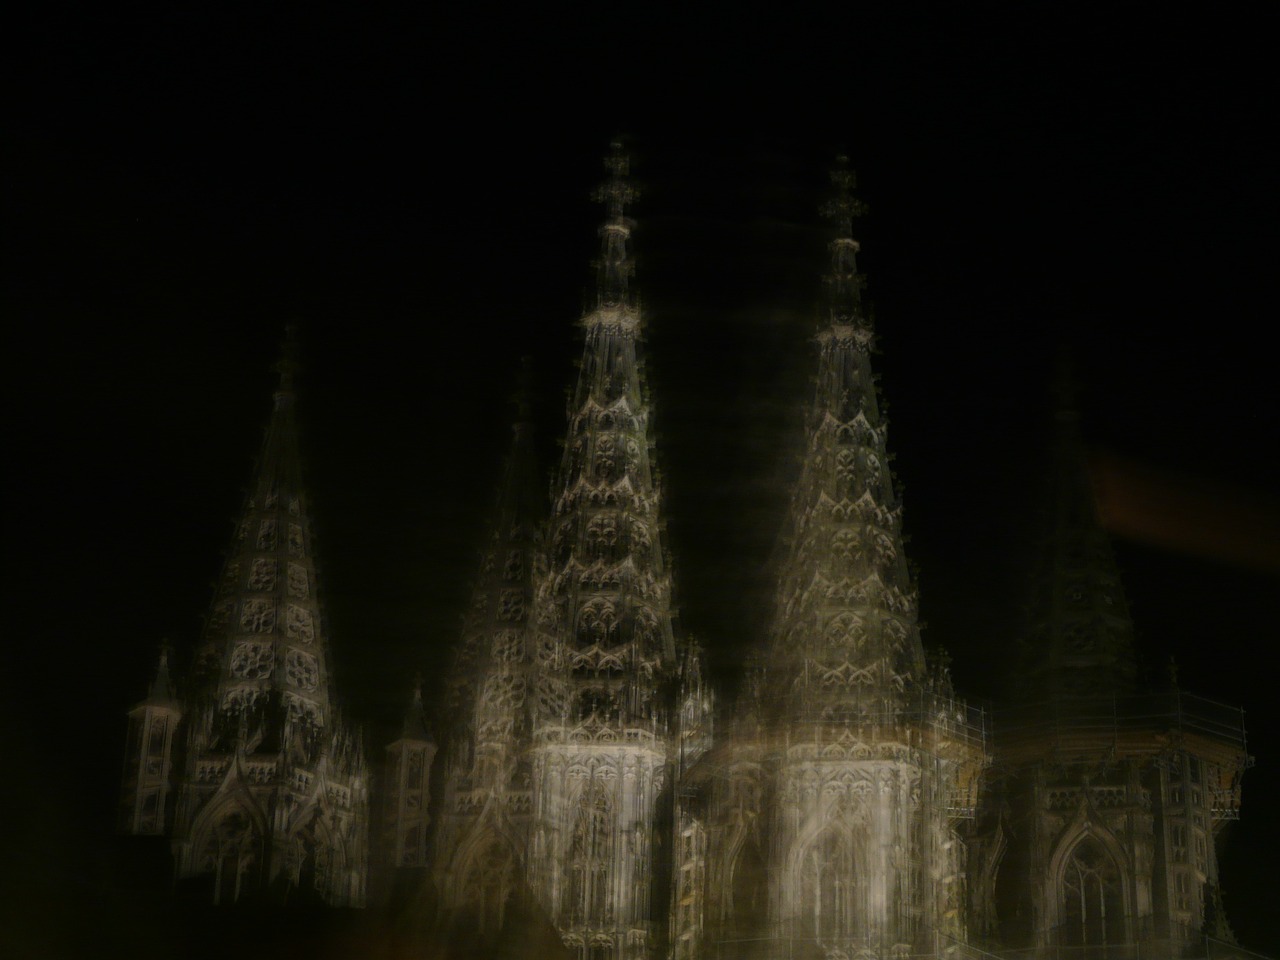 ulm cathedral wobbles spooky free photo